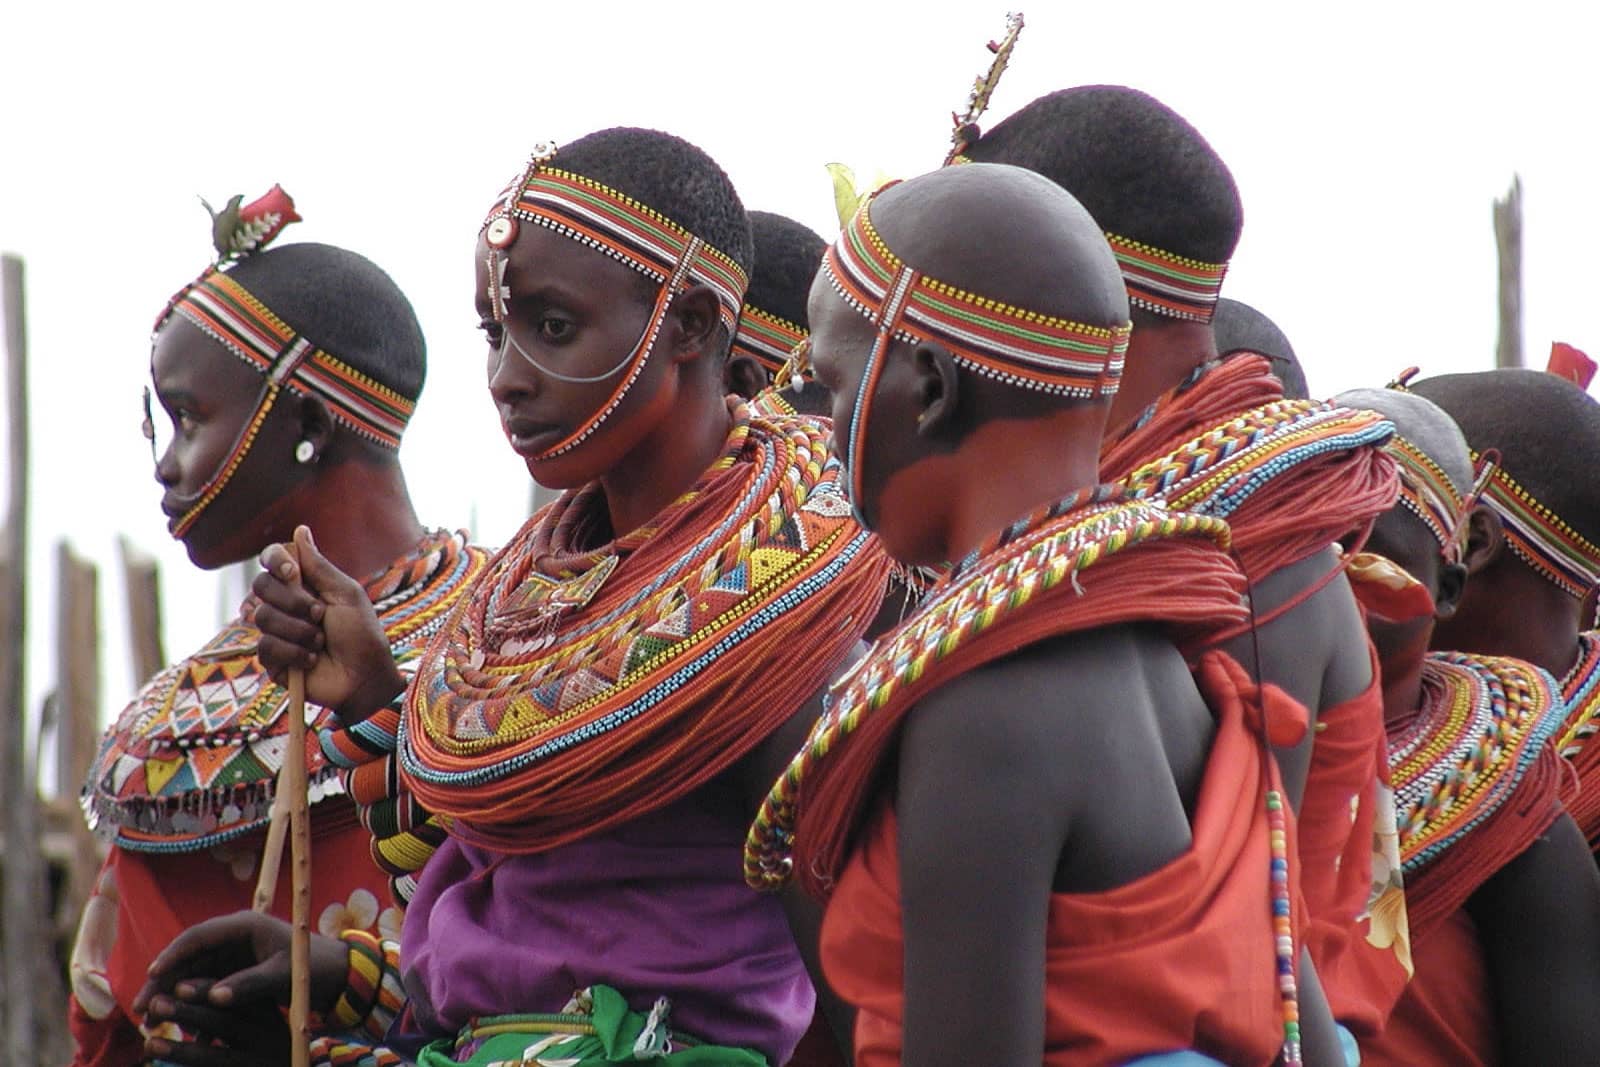 Samburu people dressed in traditional clothing including red, white, green and black headdresses and beaded collars